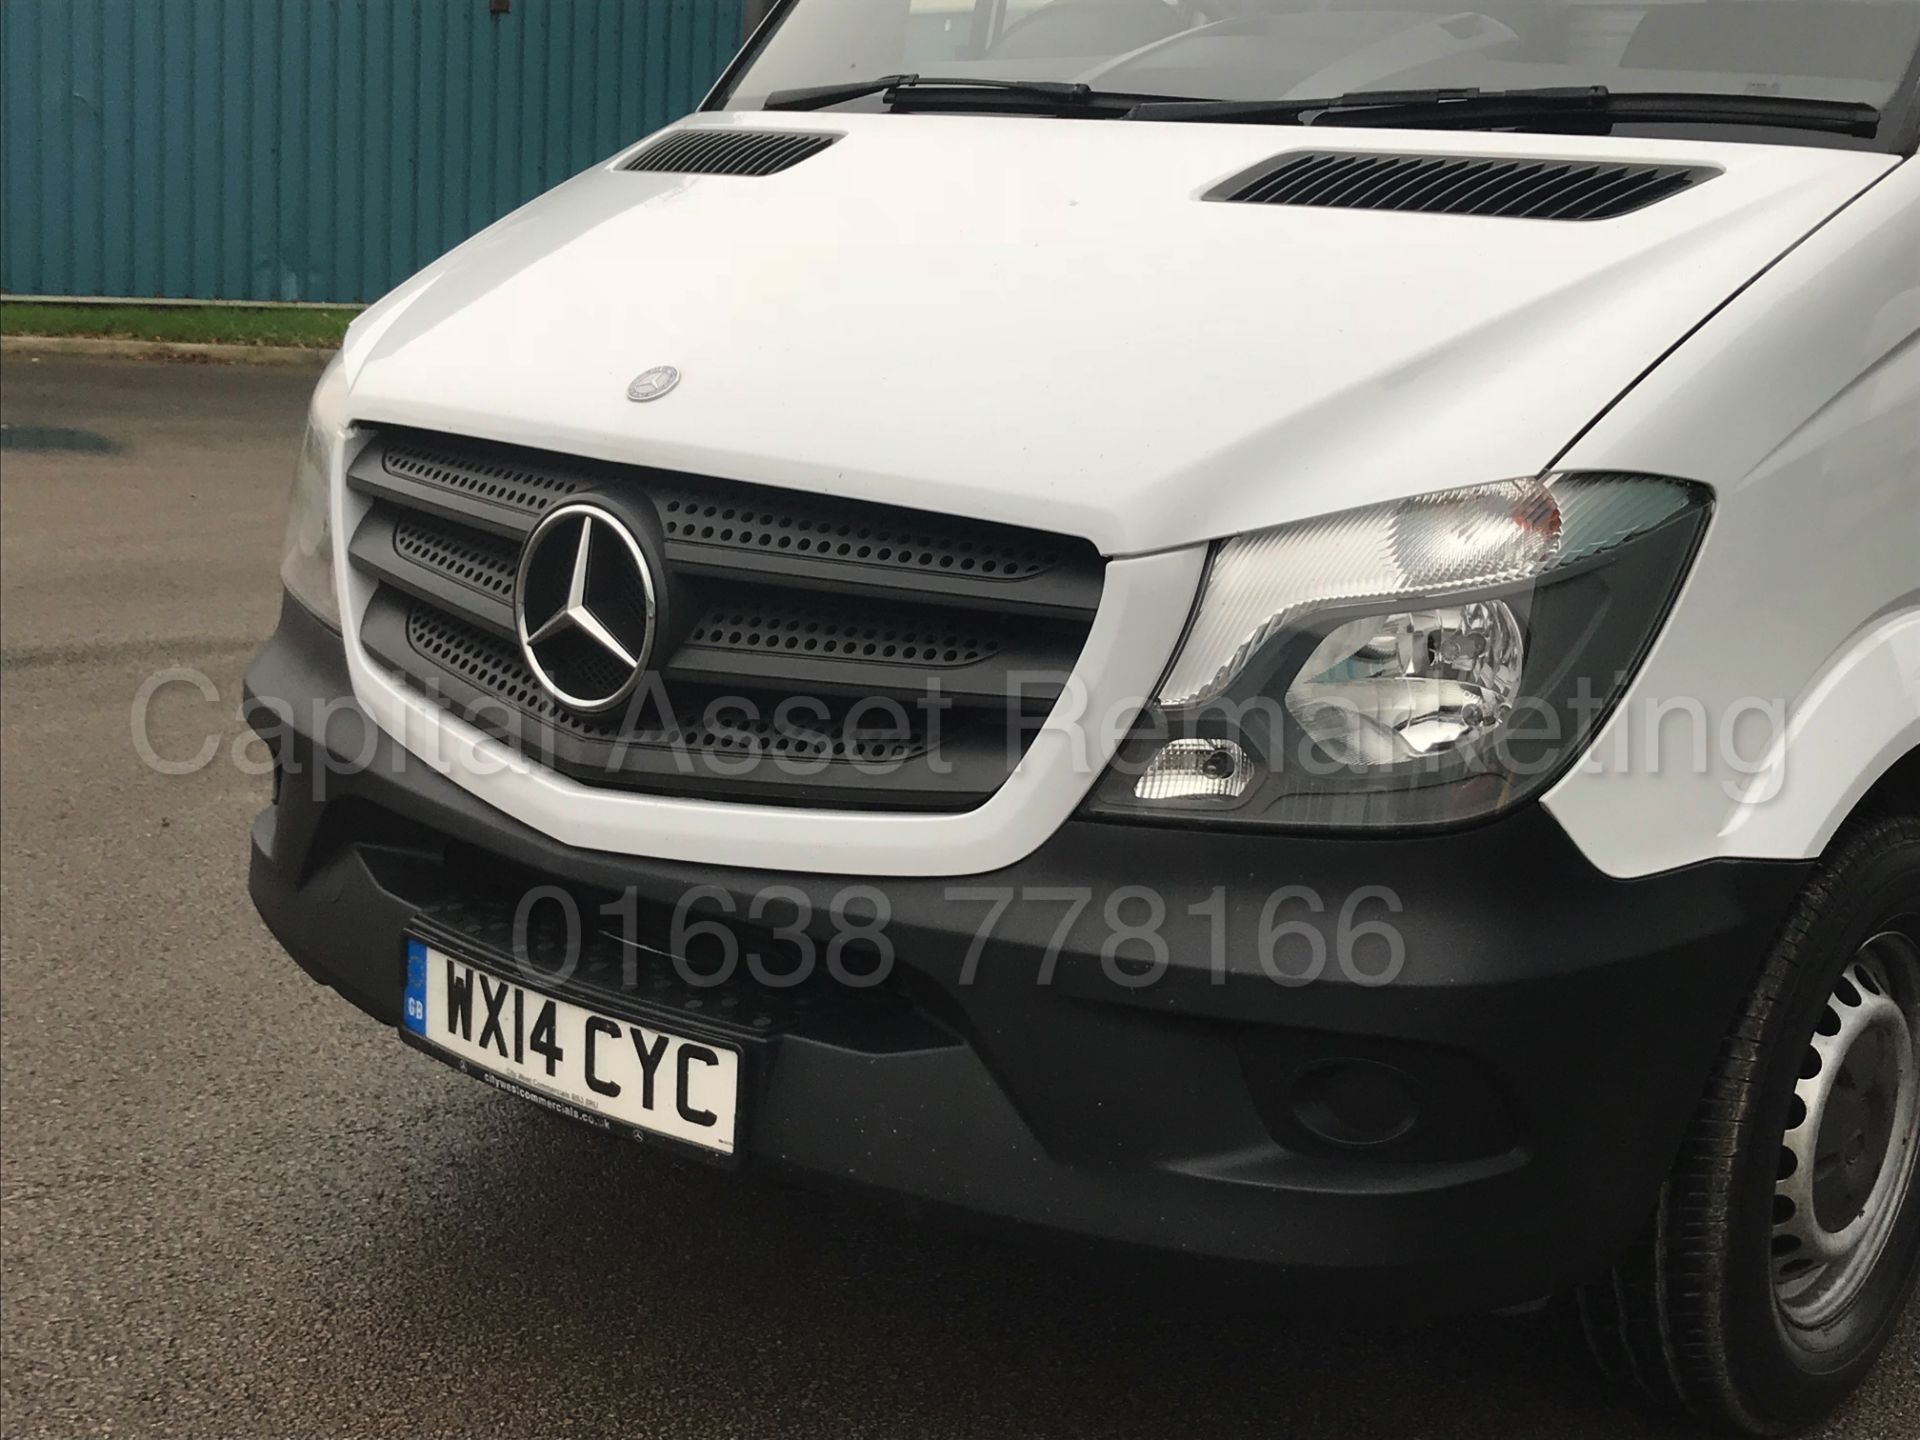 (ON SALE) MERCEDES-BENZ SPRINTER 313 CDI 'LWB - TIPPER' (2014 FACELIFT) '130 BHP -6 SPEED' *1 OWNER* - Image 12 of 24